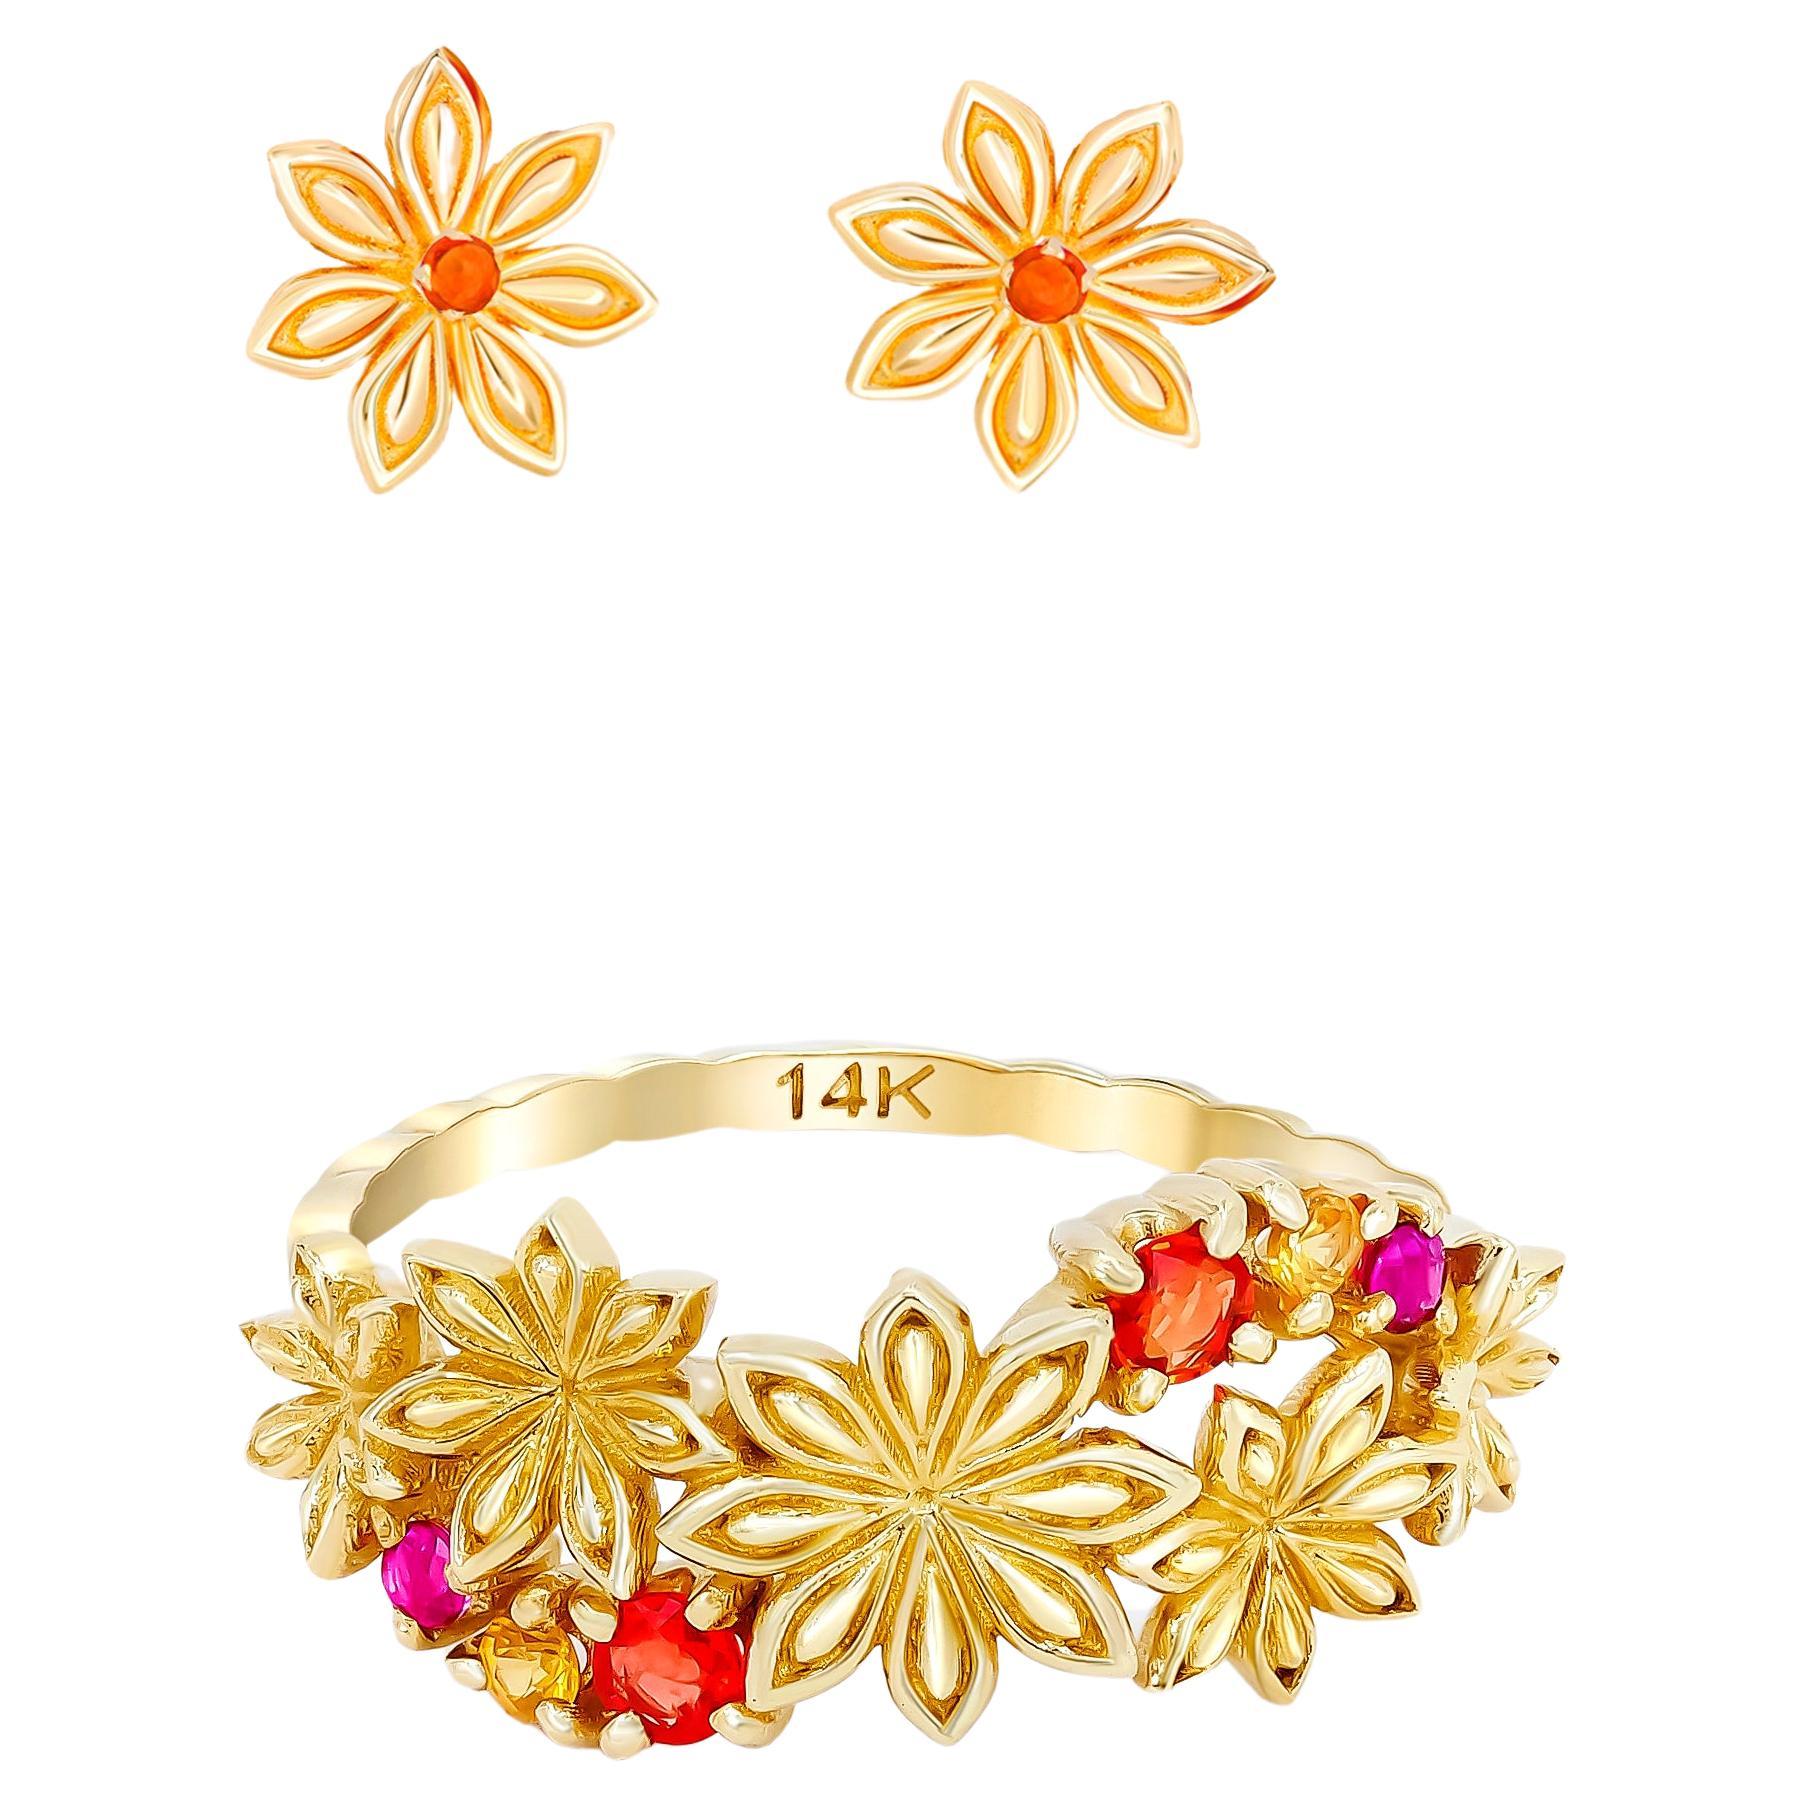 Star Anise Flower Jewelry set: ring and earrings in 14k gold. For Sale